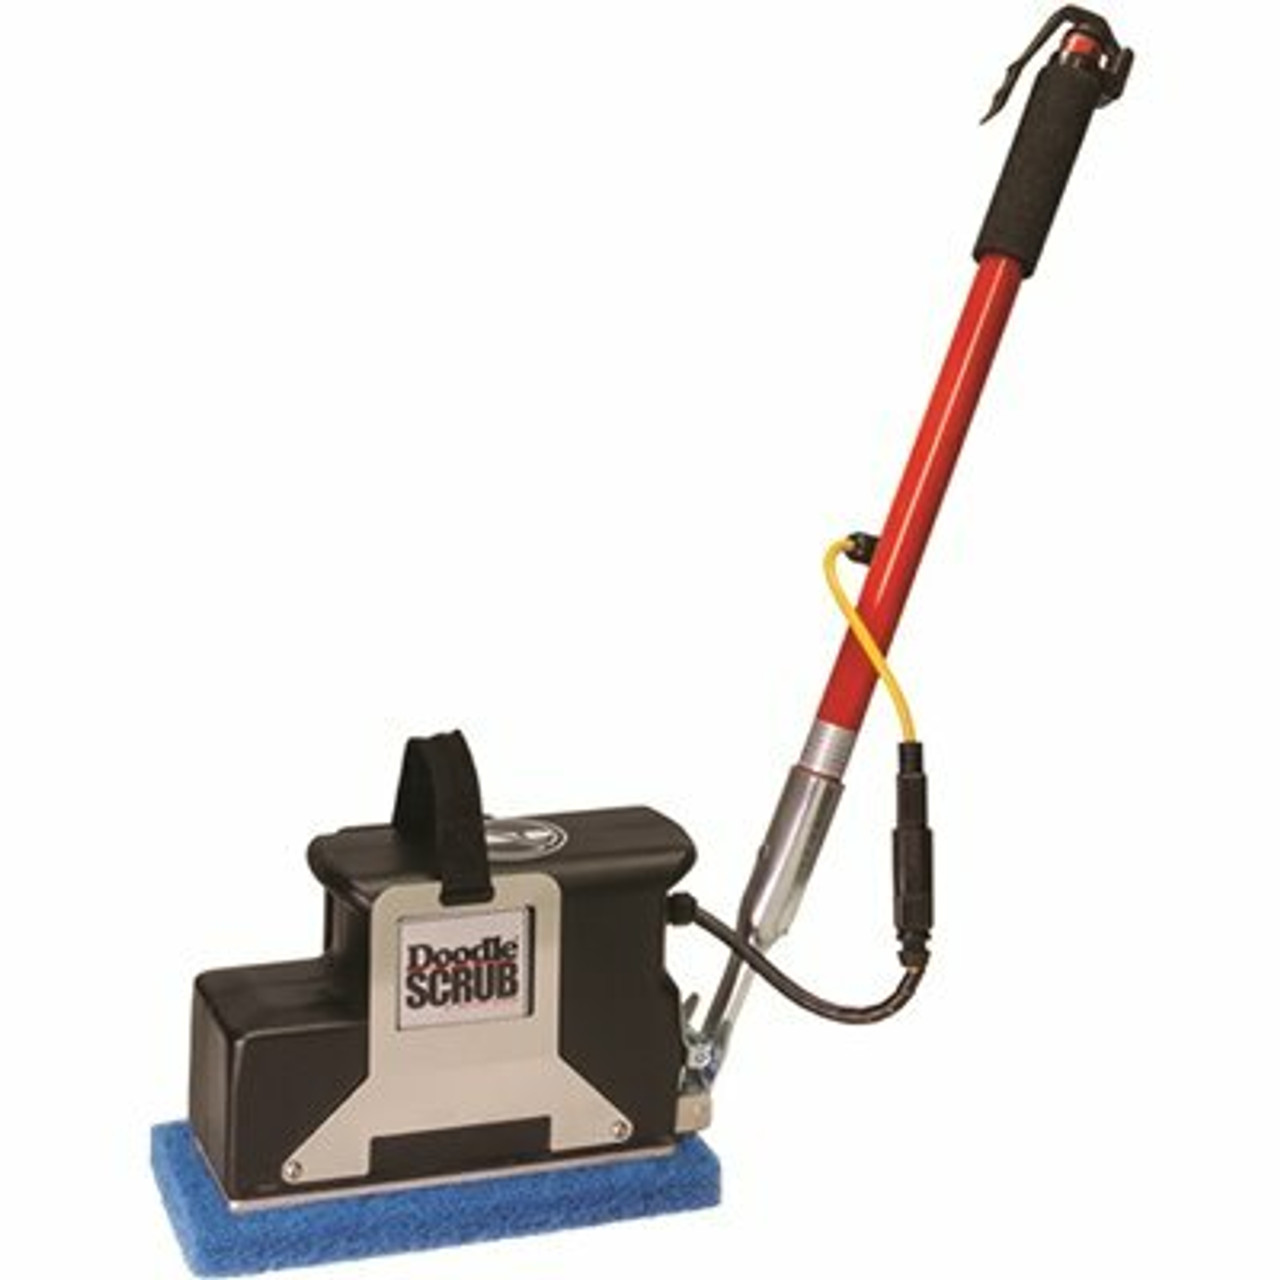 Square Scrub 24 In. Doodle Scrub With Handle